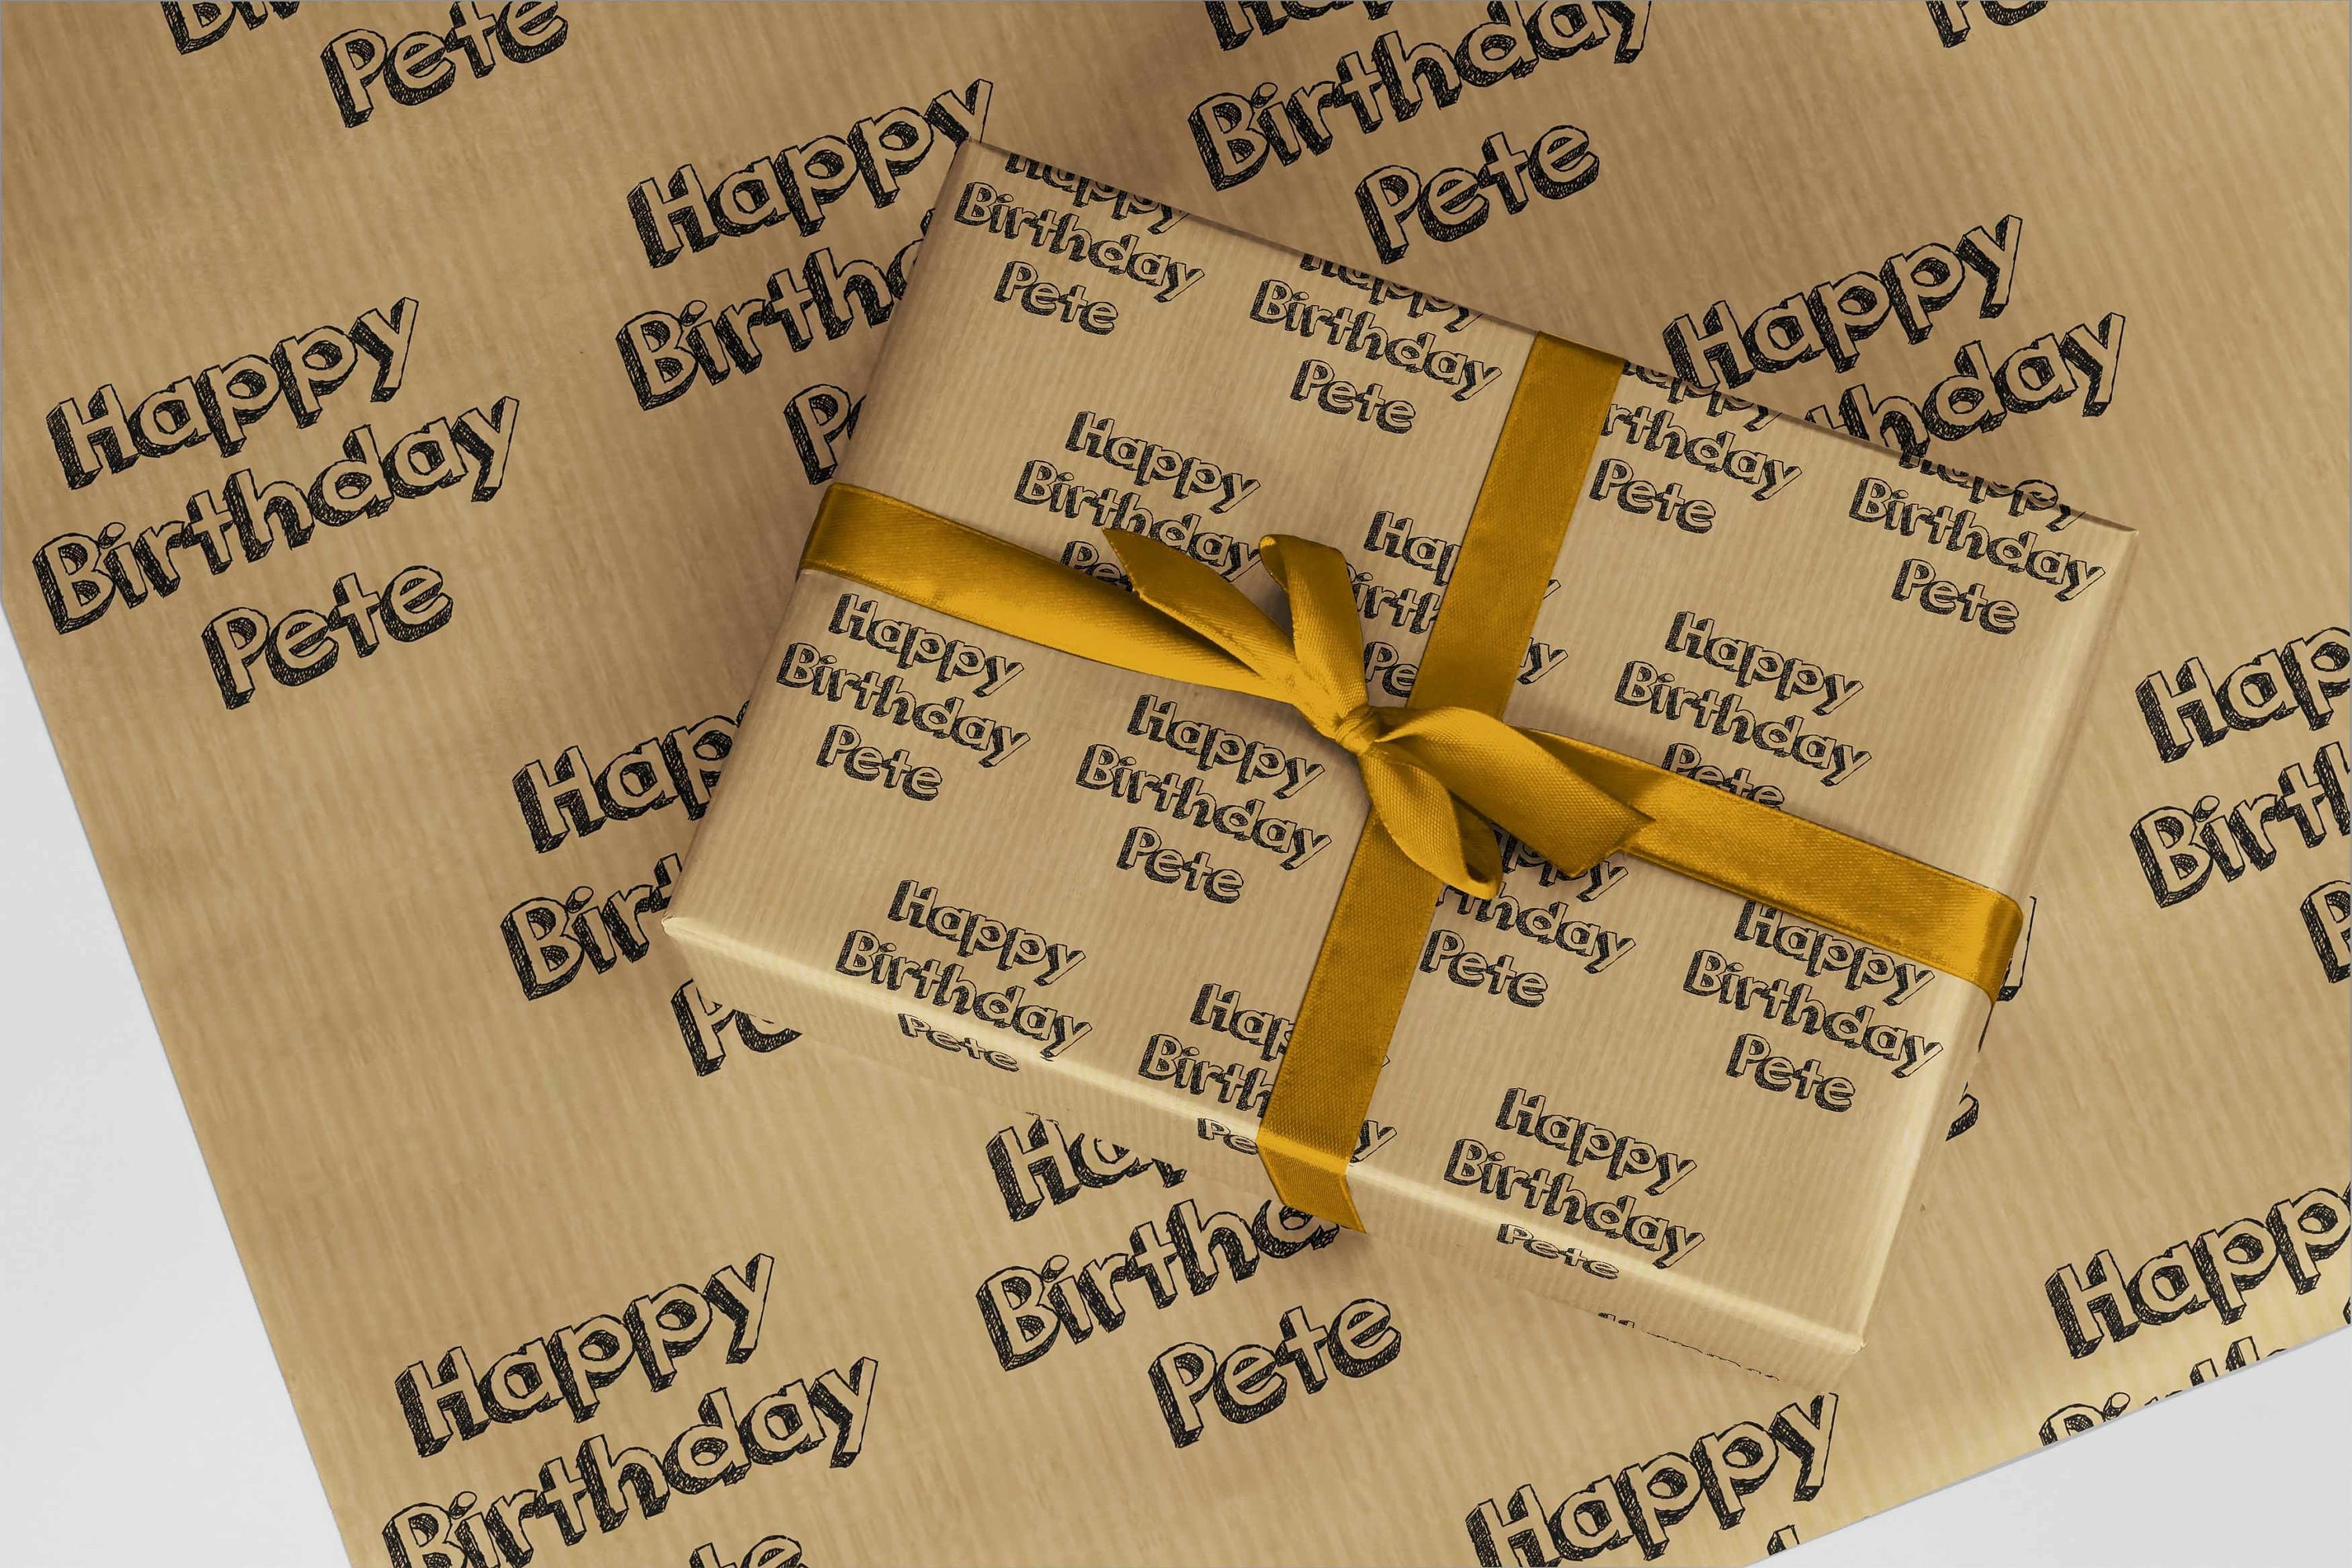 Simple Solid Brown Wrapping Paper - Plain Brown Wrapping Paper